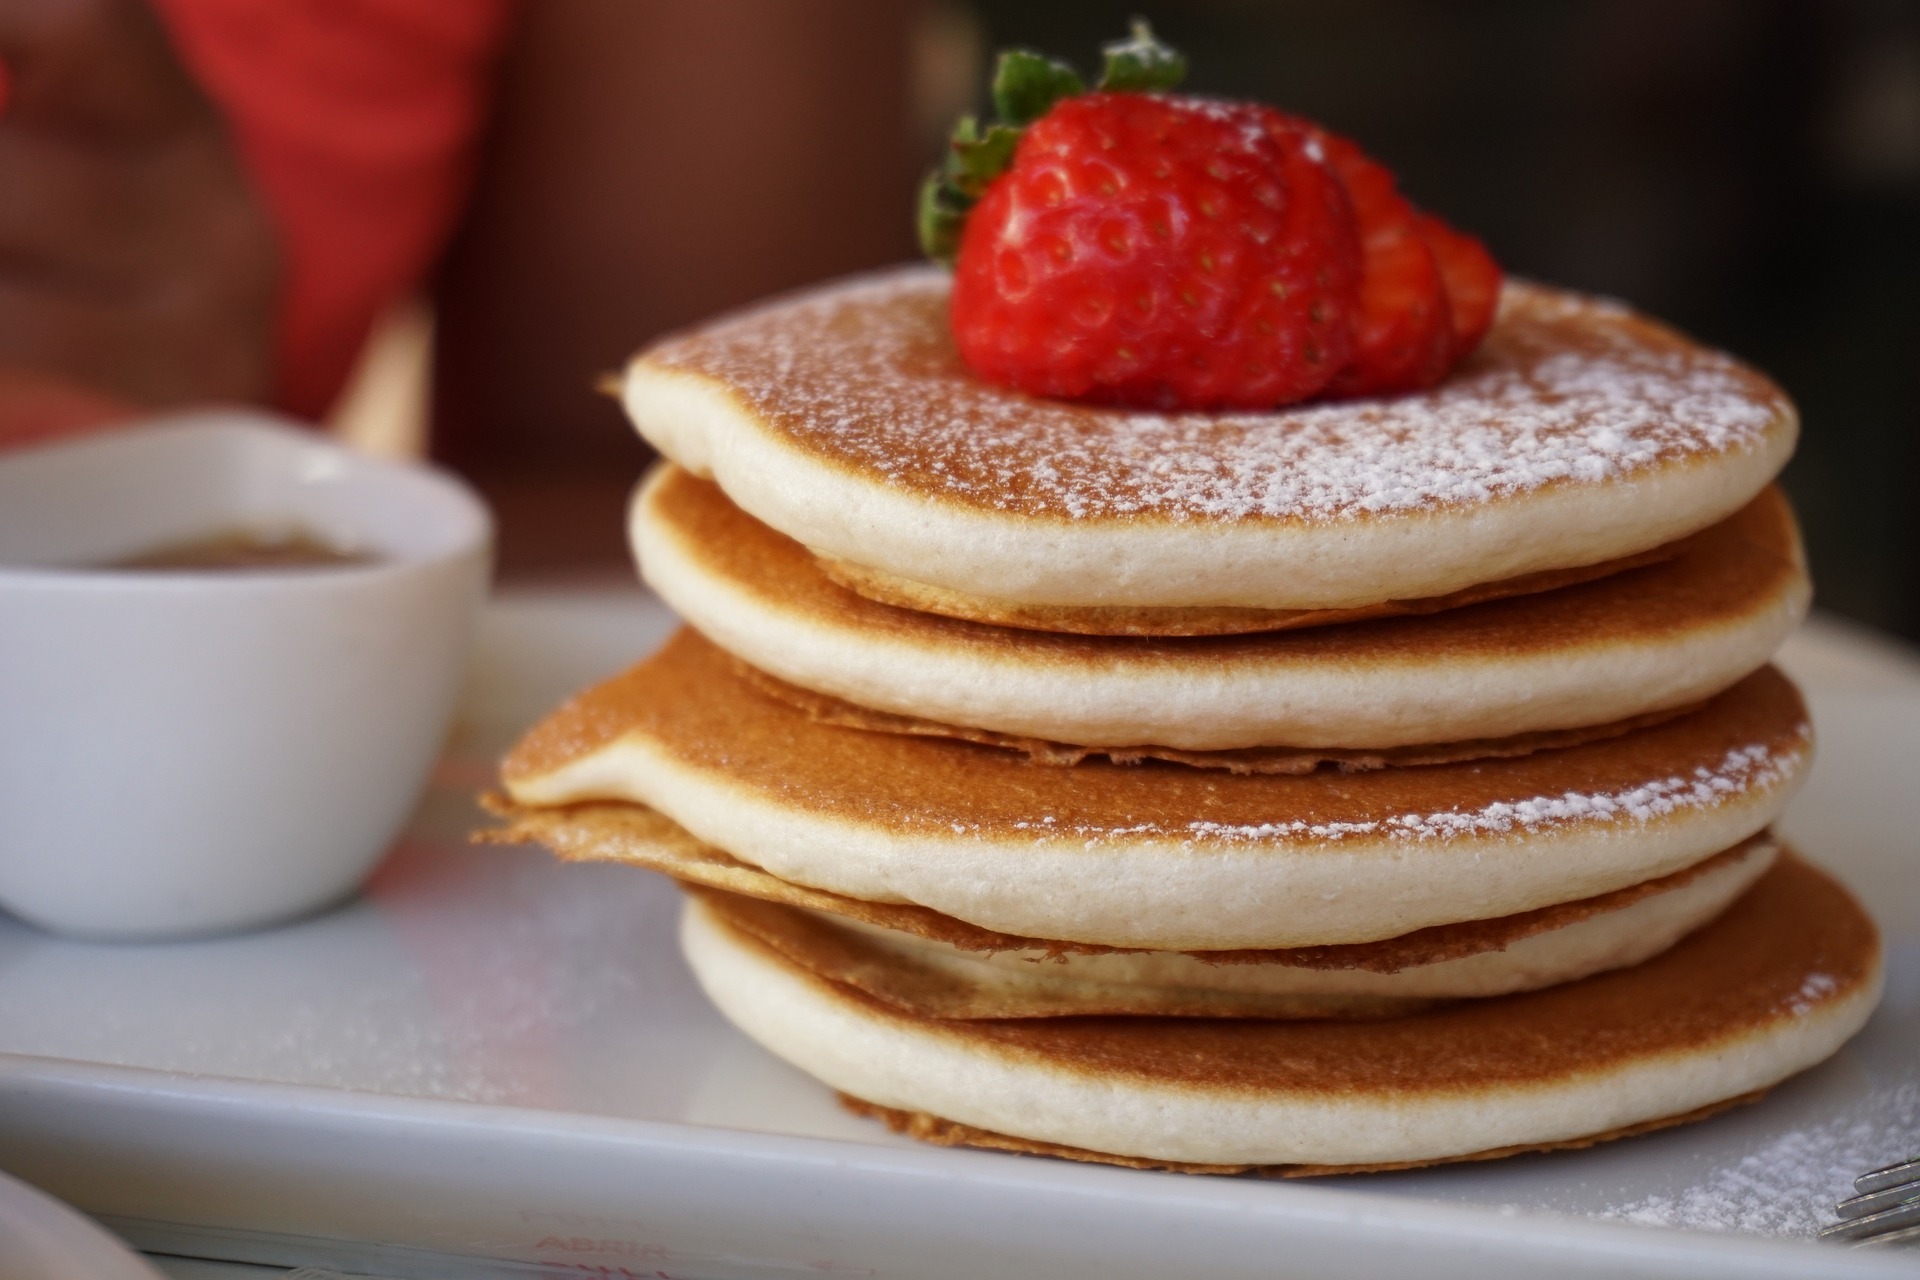 A stack of pancakes topped with strawberries and powdered sugar.